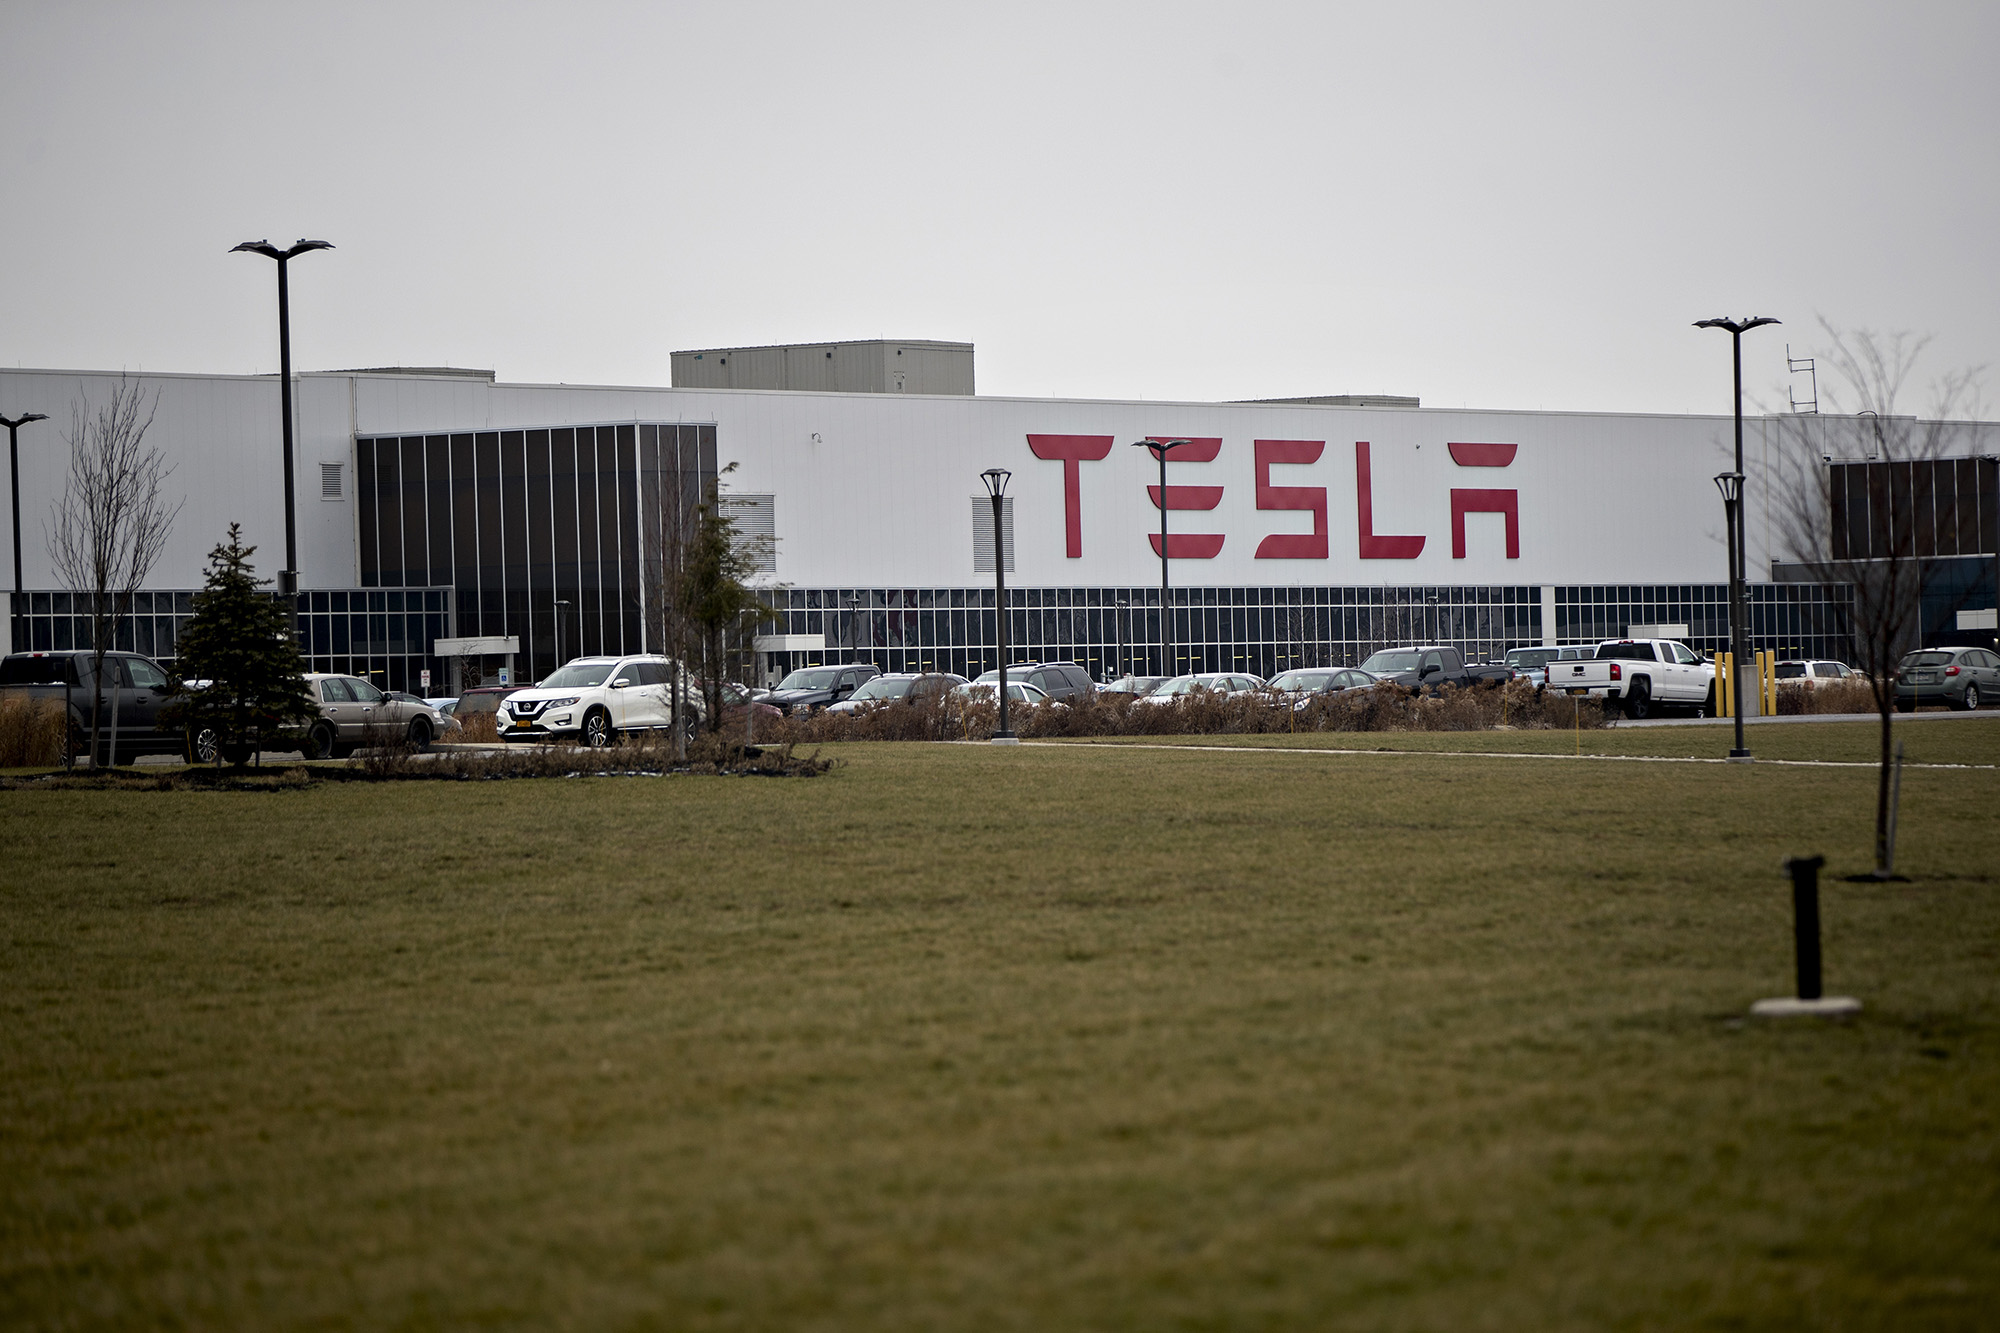 Vehicles sit parked outside the Tesla solar panel factory in Buffalo, New York.